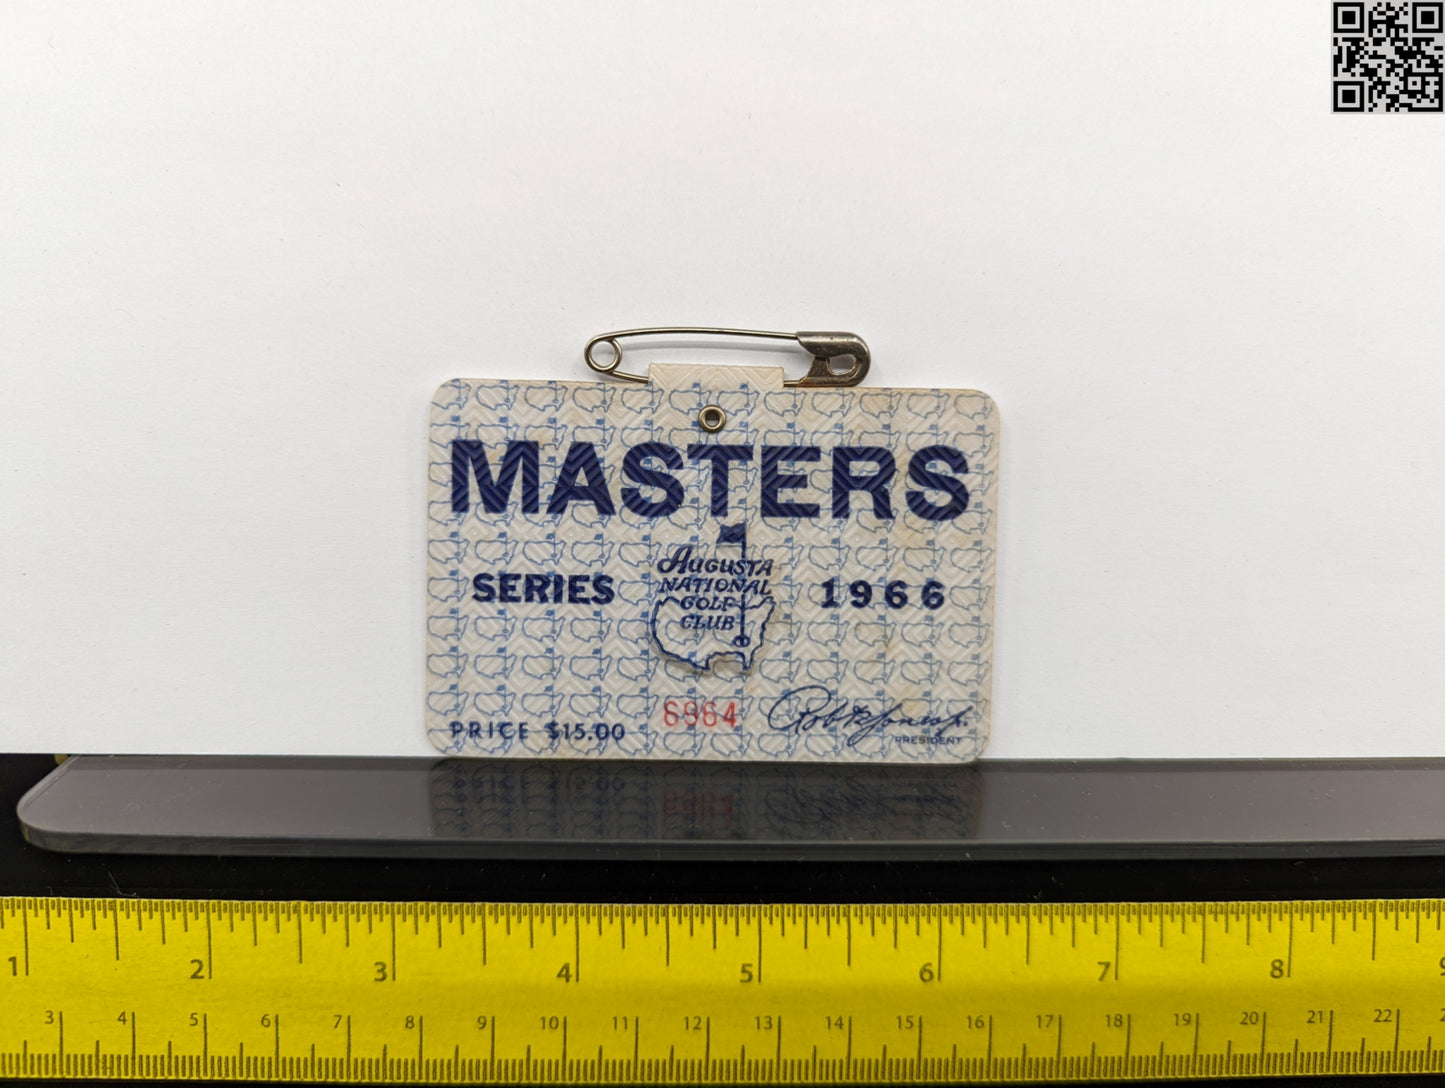 1966 Masters Tournament Series Badge - Augusta National Golf Club - Jack Nicklaus Win